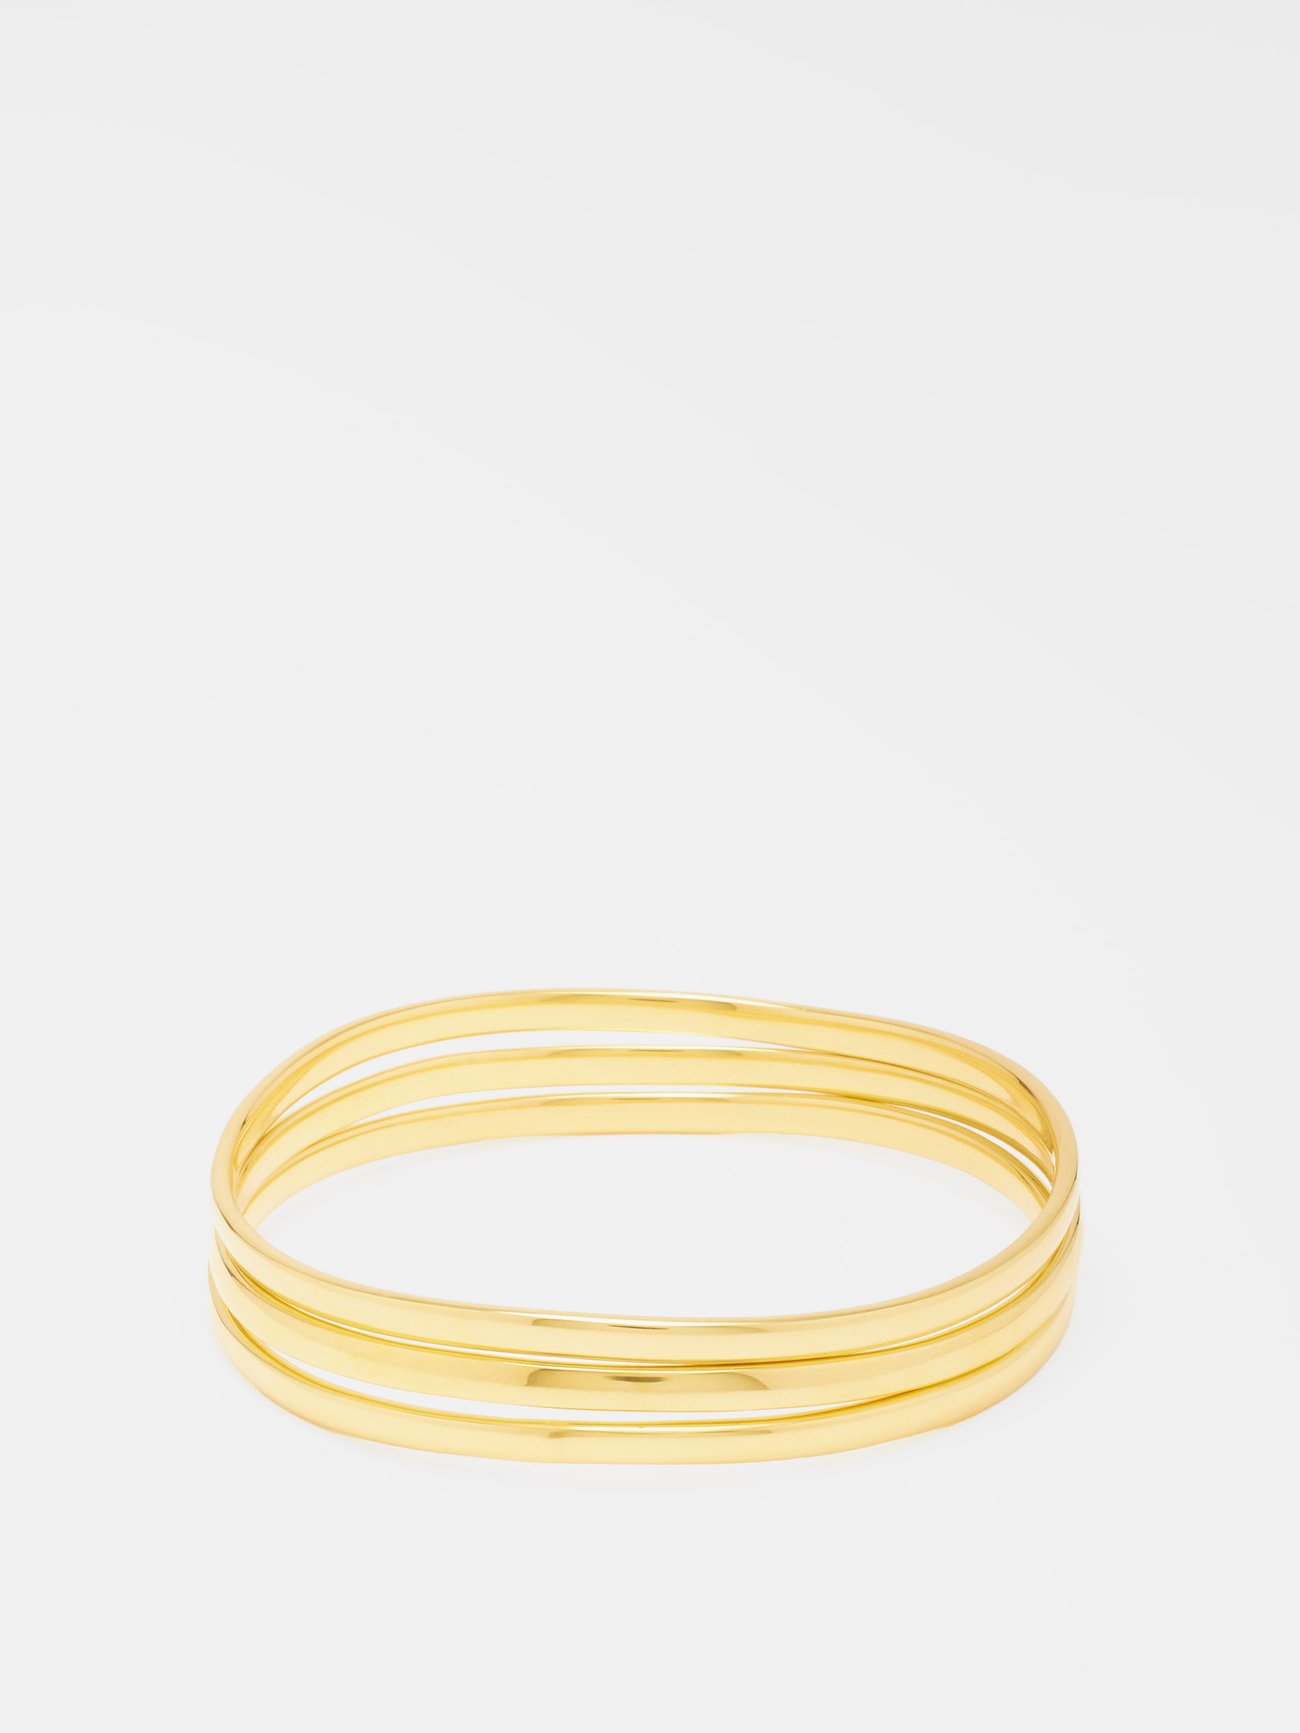 Set of Three Moune 18kt Gold-Plated Bangles